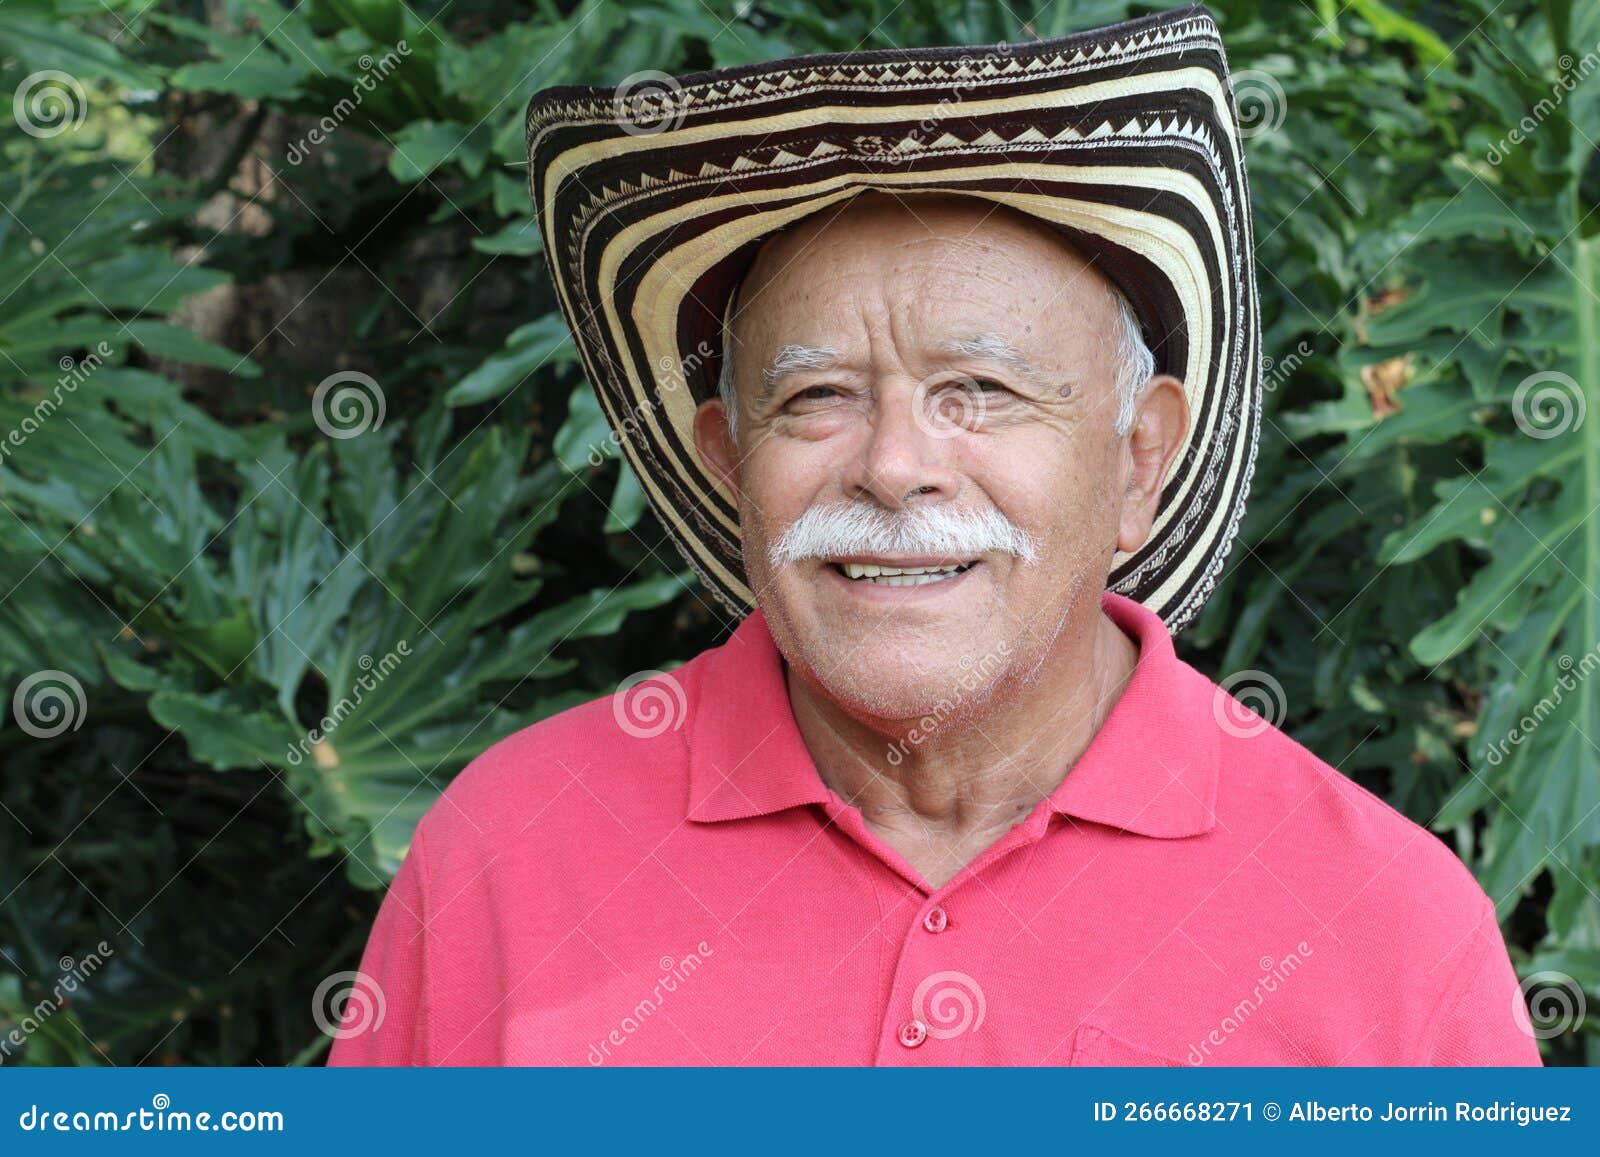 senior man wearing traditional colombian hat